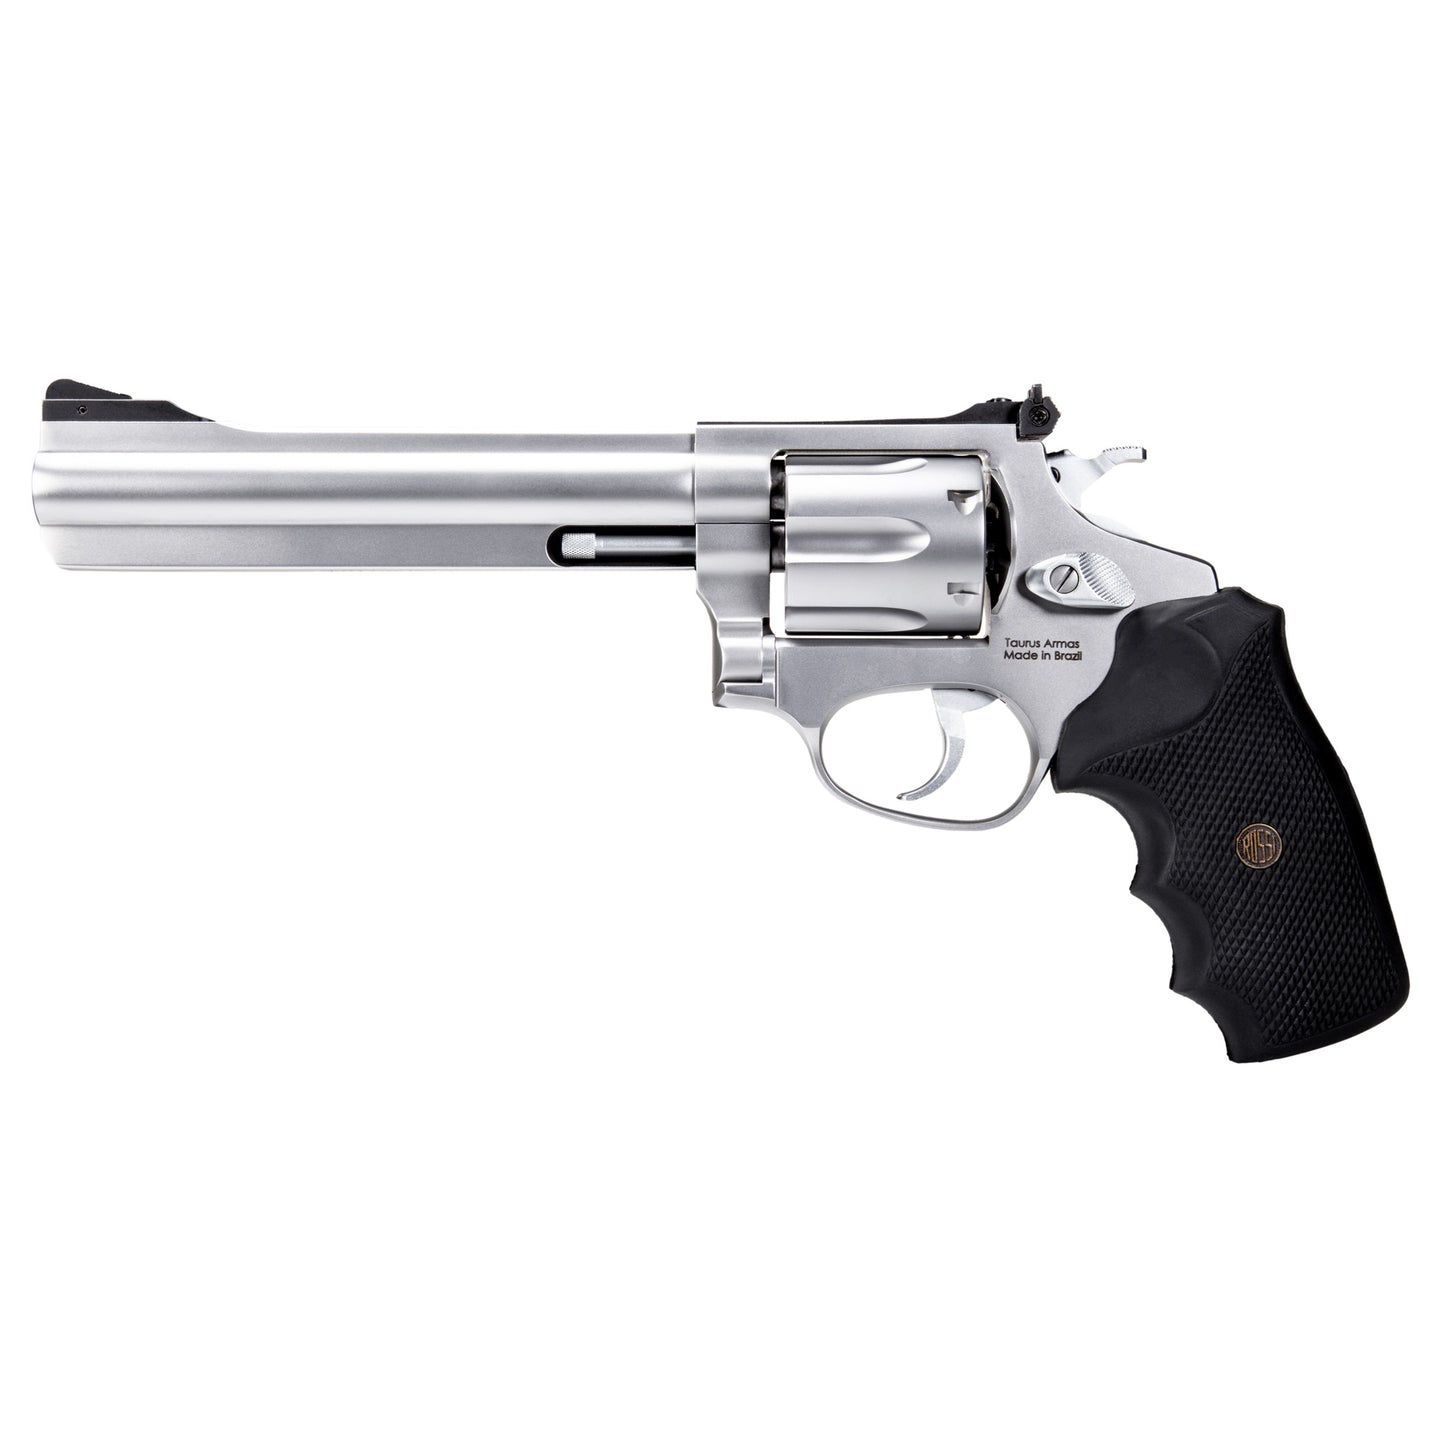 Rossi, RM66, Double Action/Single Action, Steel Framed Revolver, 357 Magnum, 6" Barrel, Stainless Steel Finish, Silver, Rubber Grips, Adjustable Sights, 6 Rounds